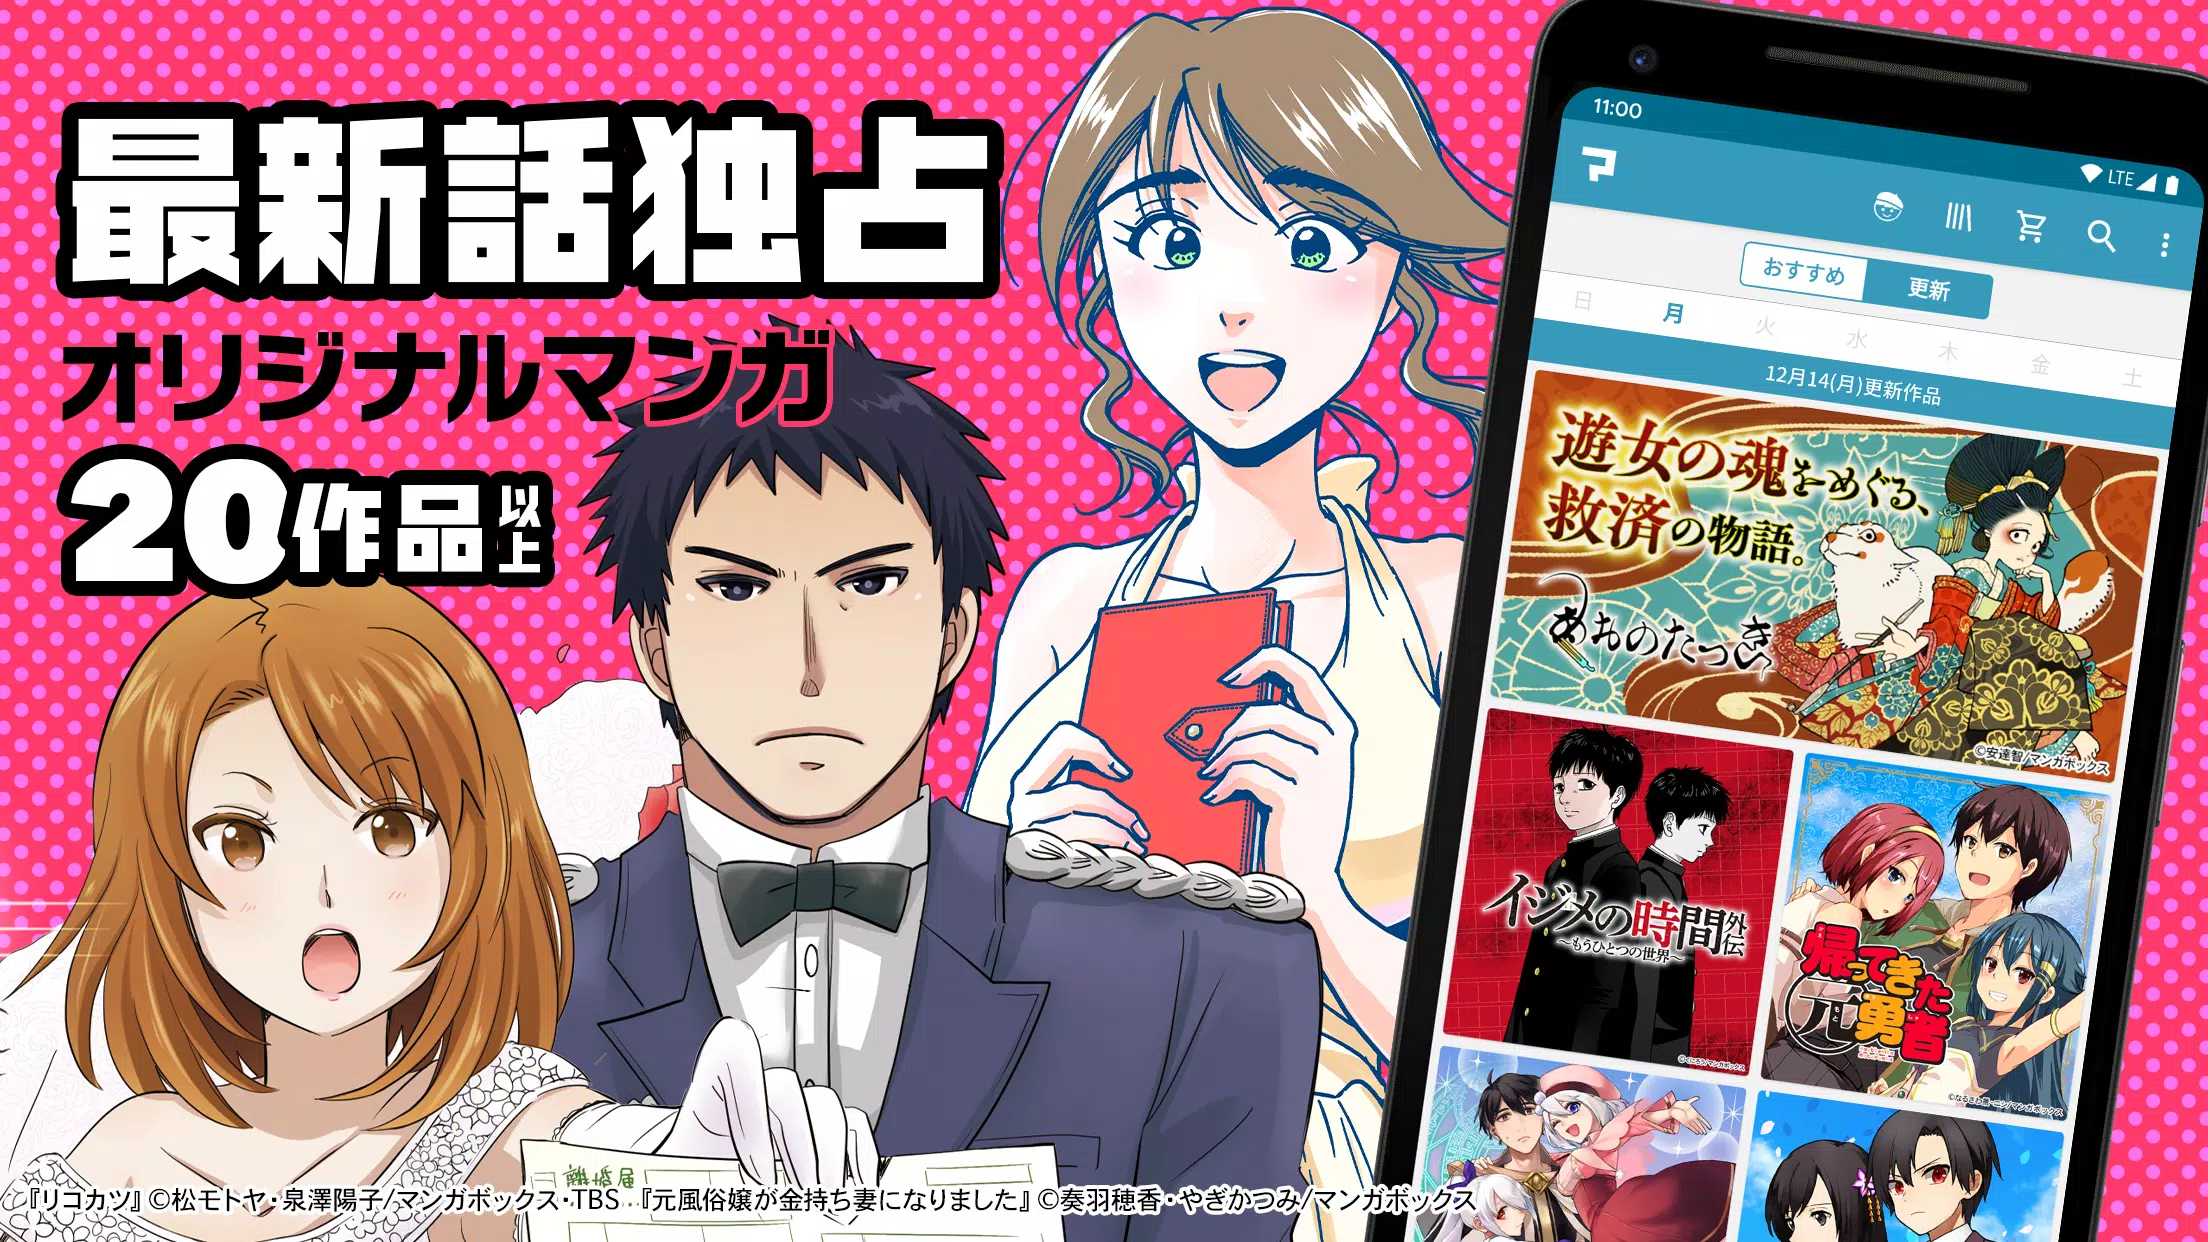 Anime Box APK for Android Download